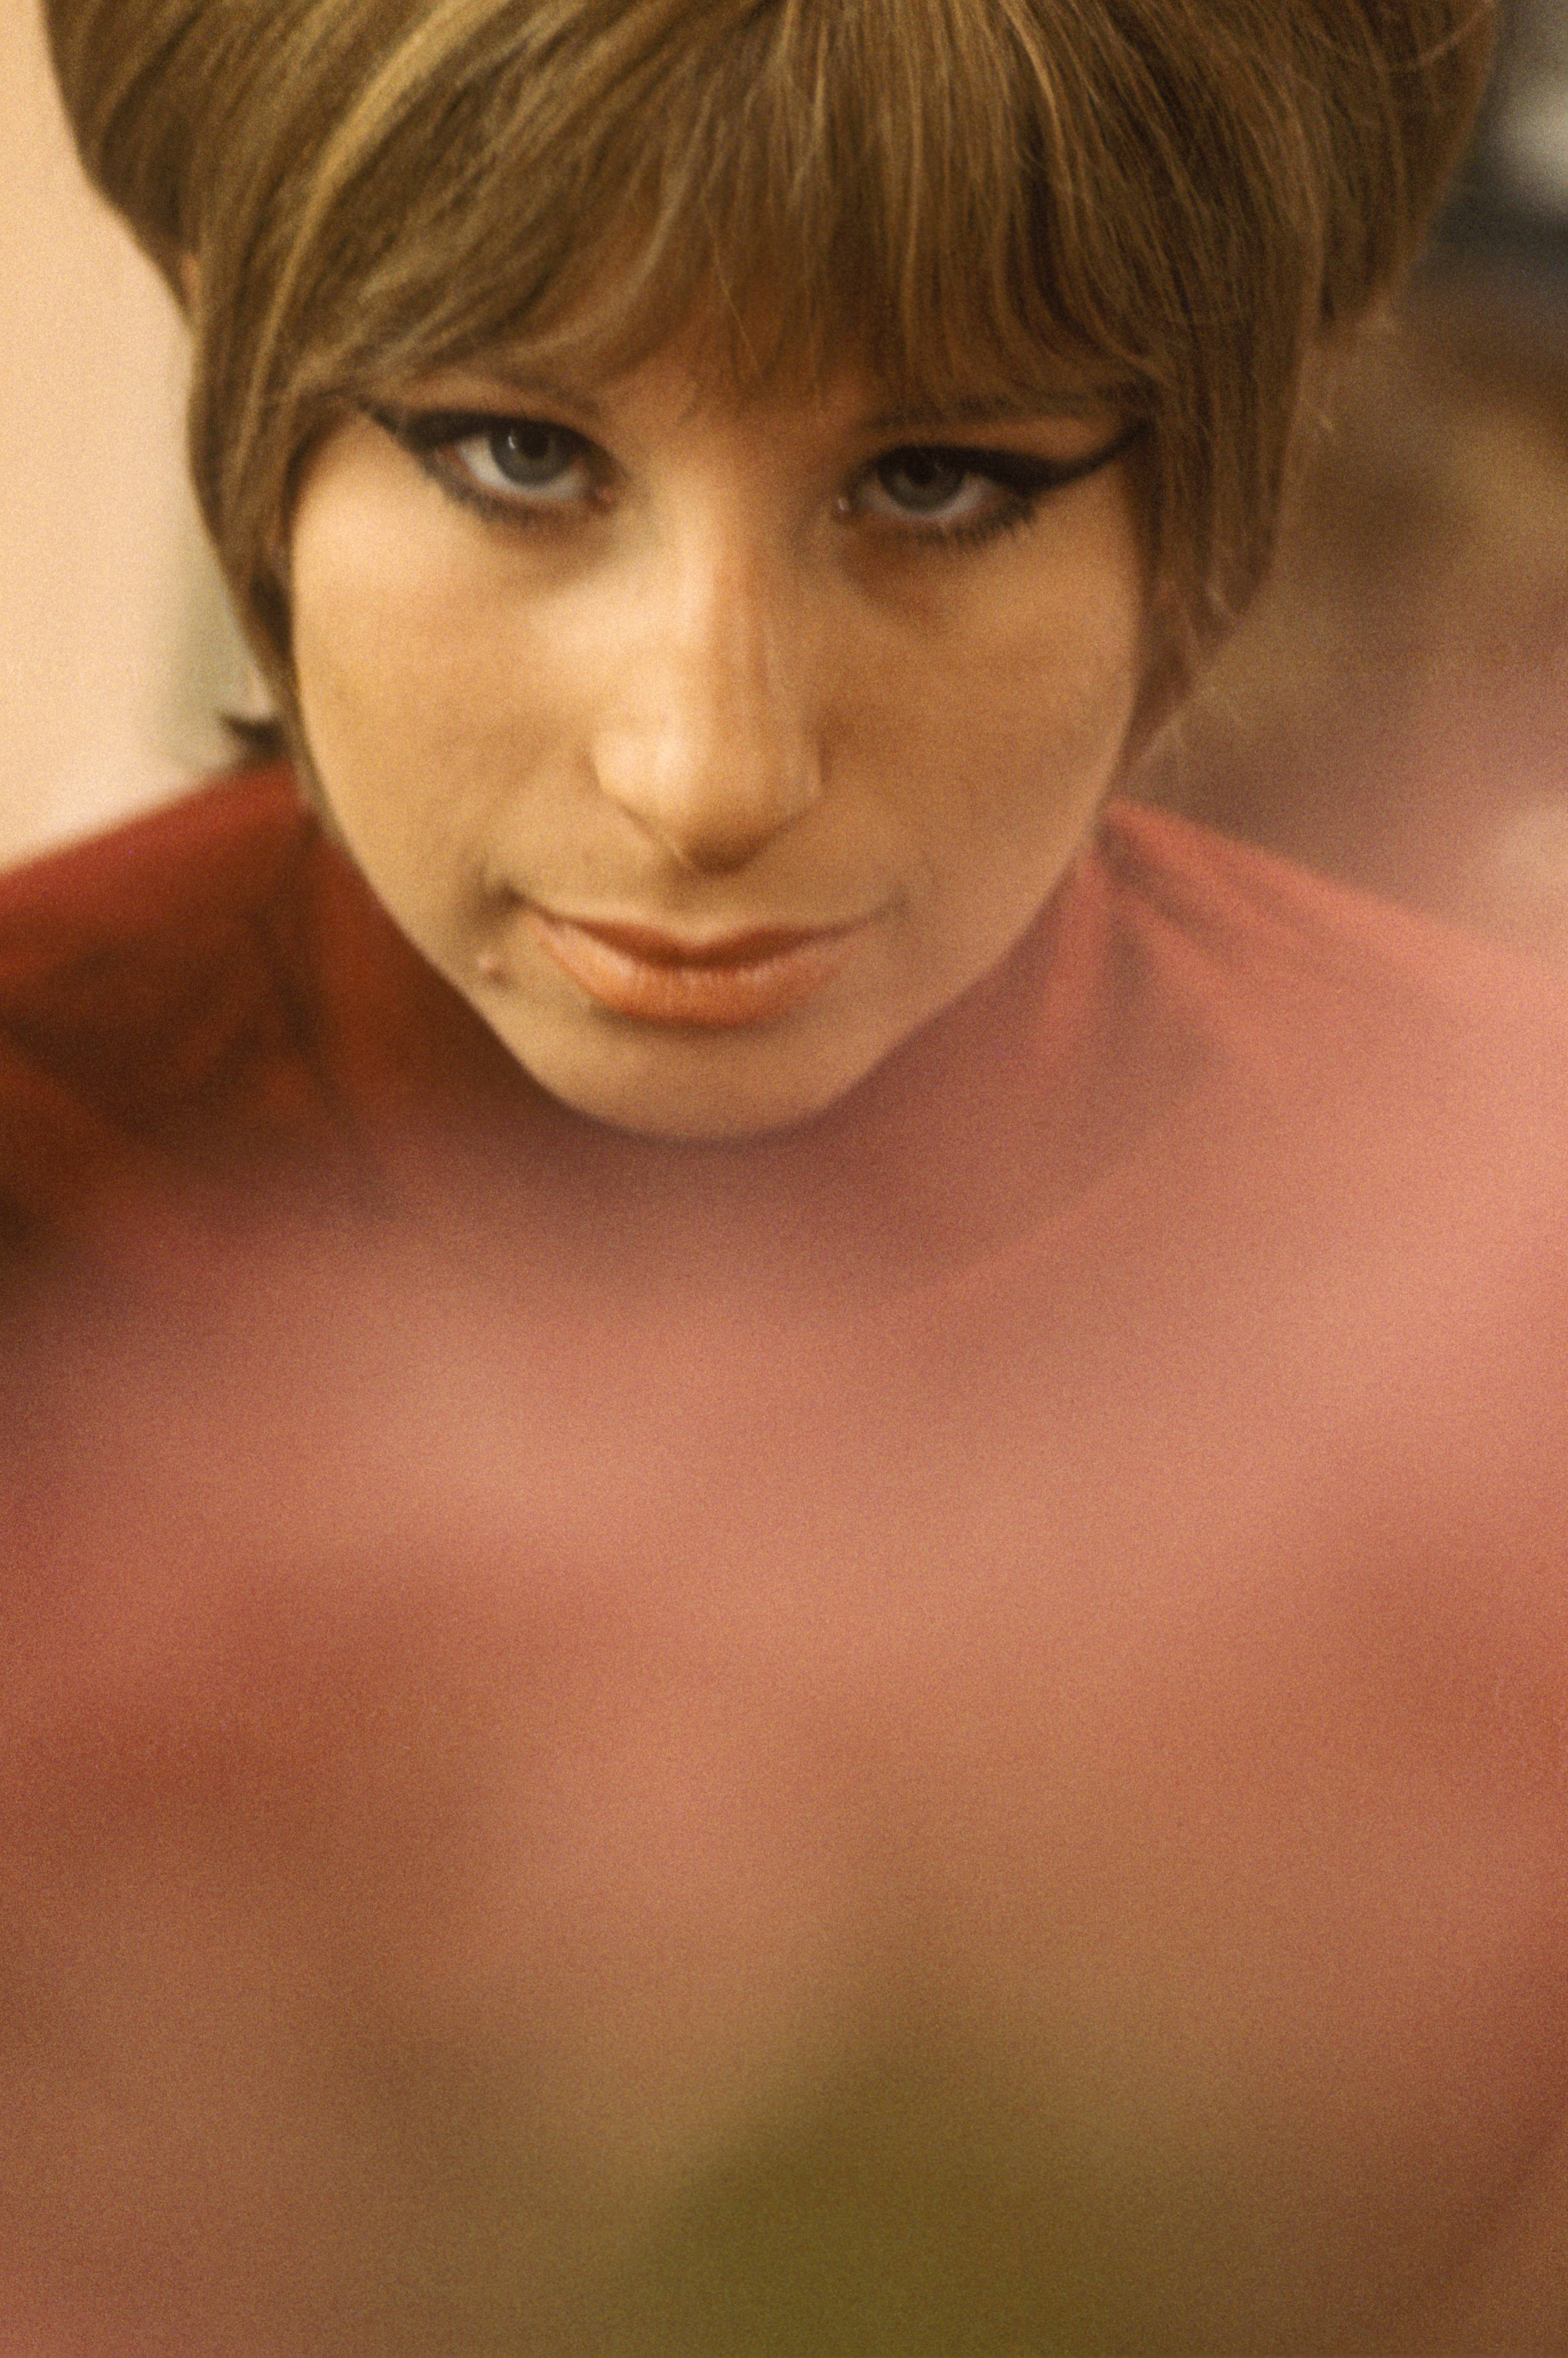 Barbra Streisand photographed in 1970 | Source: Getty Images 